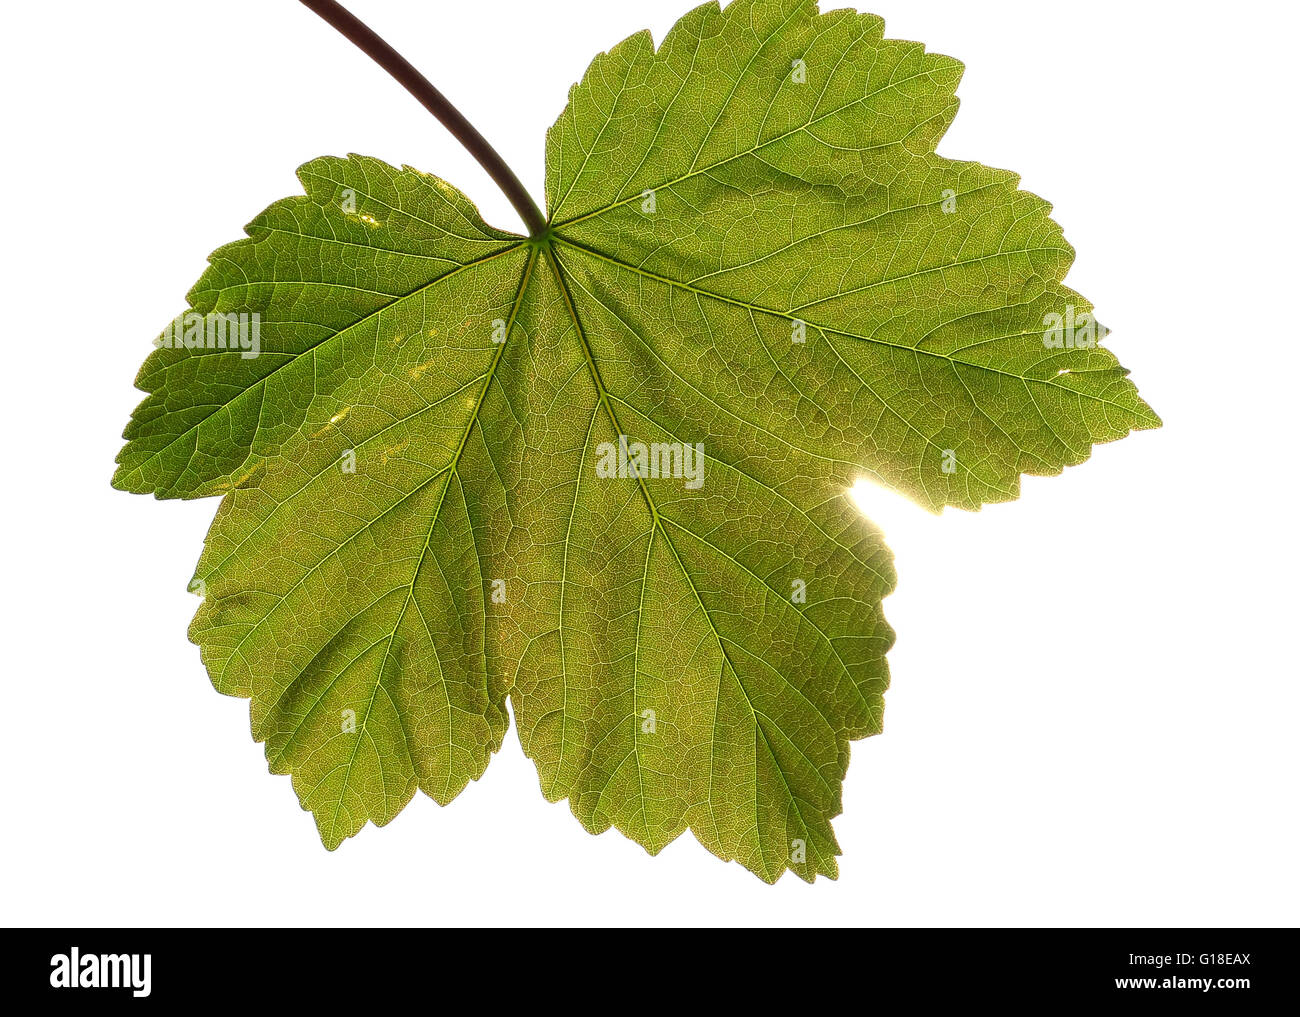 Sycamore leaf Stock Photo